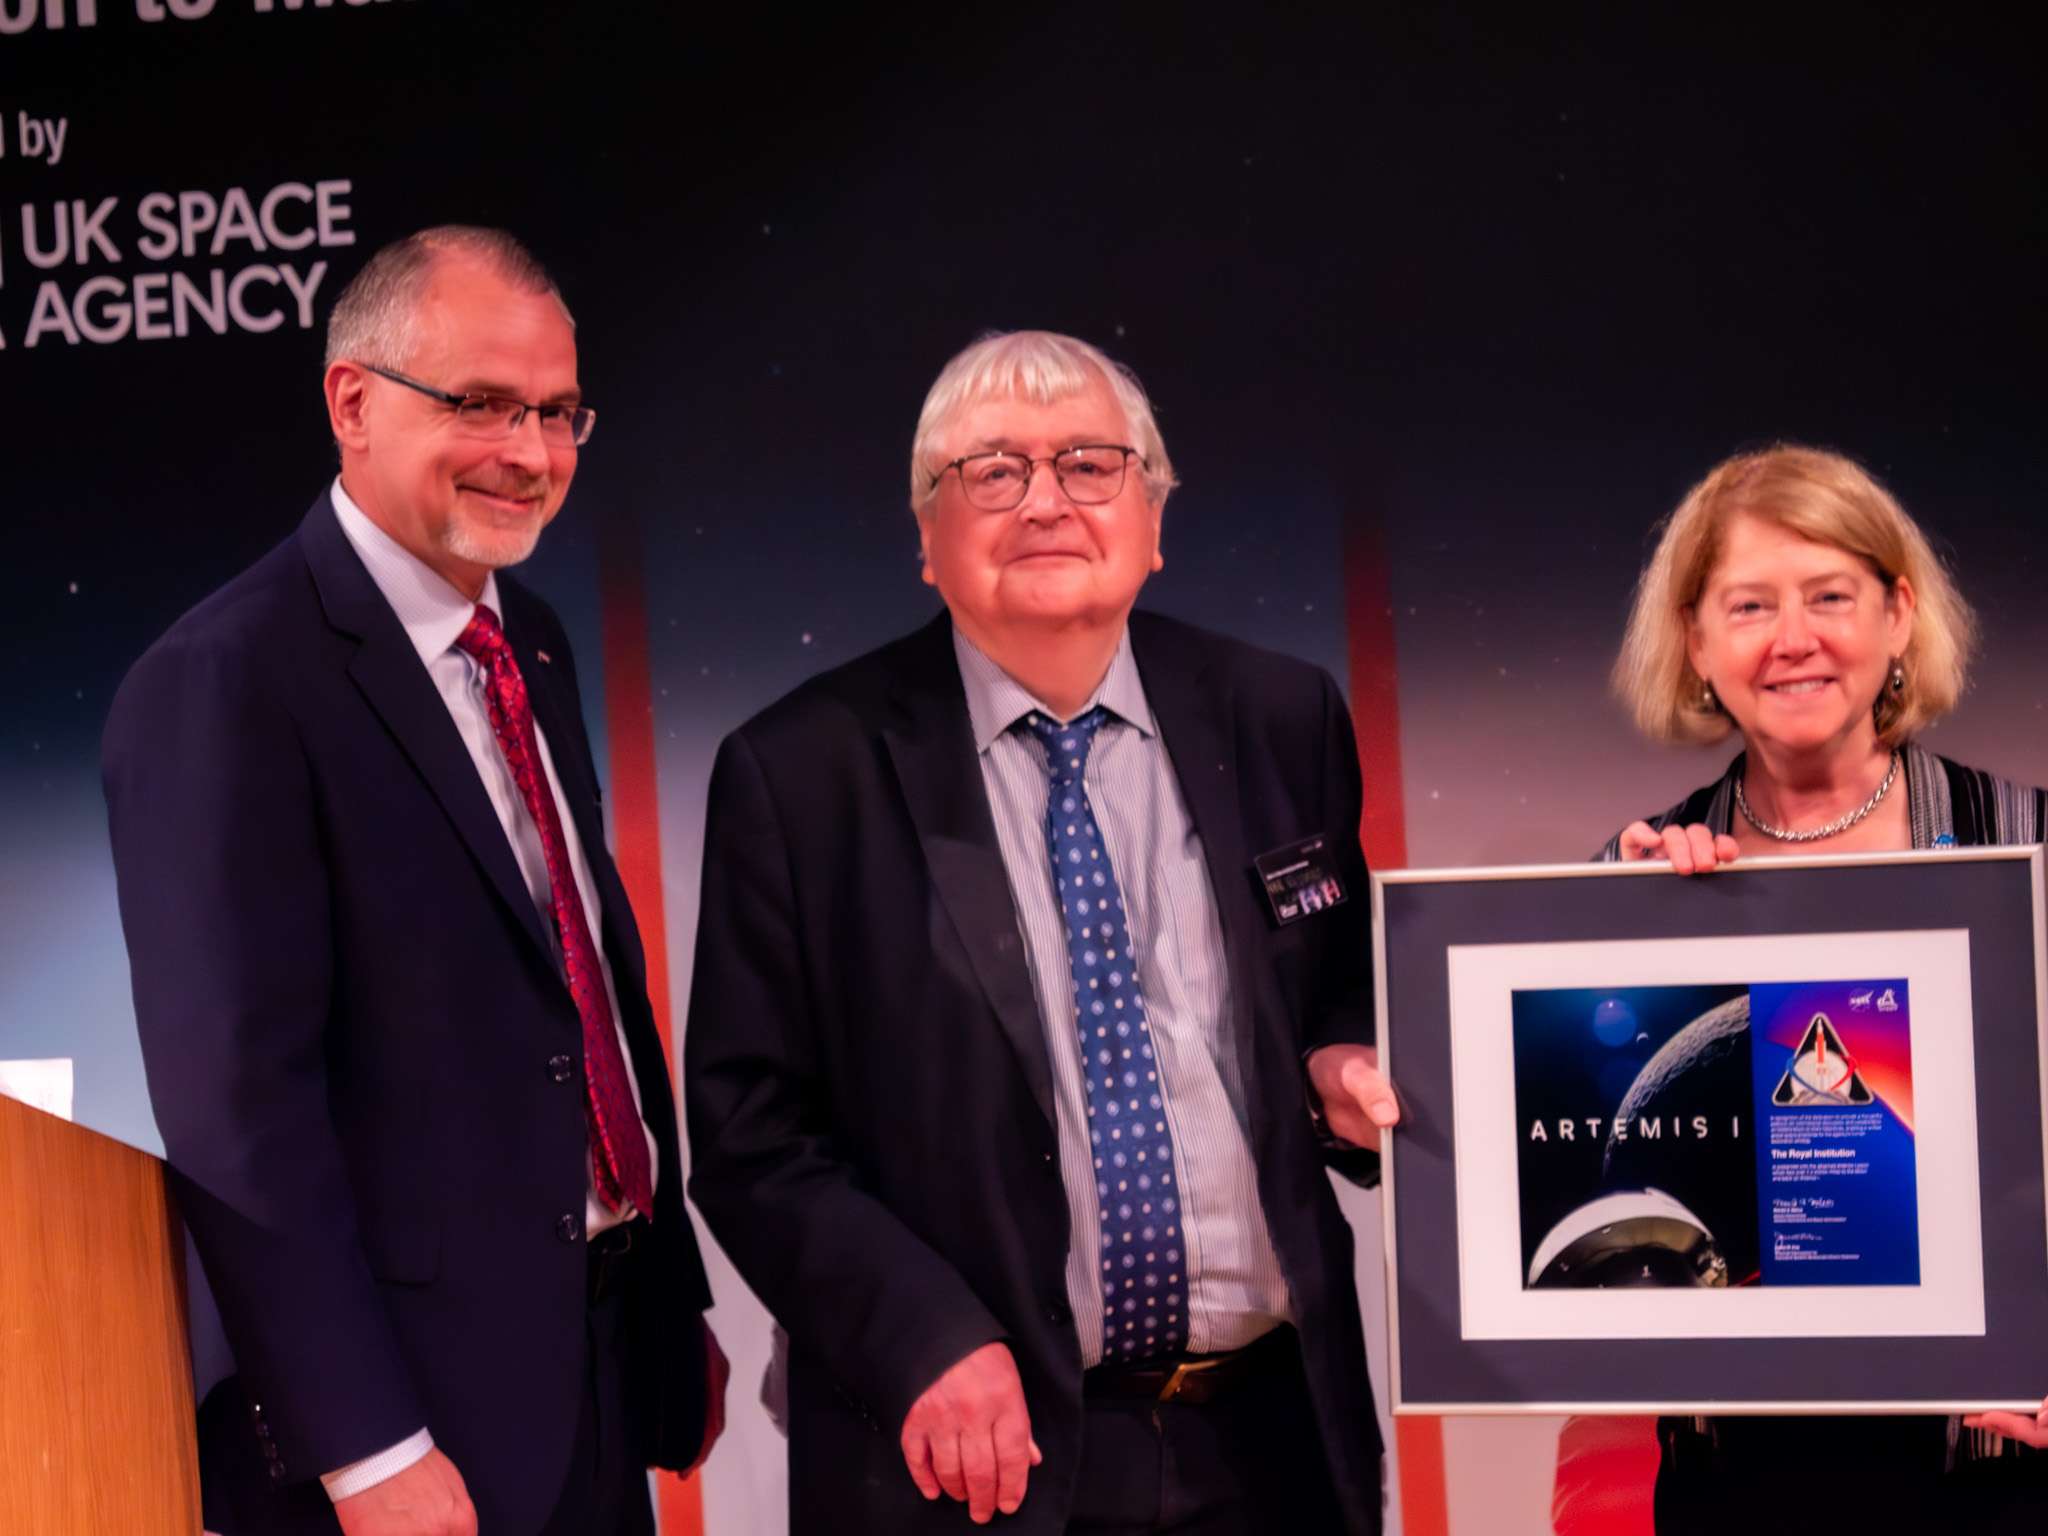 NASA Deputy Administrator Pam Melroy and Associate Administrator for the Exploration Systems Development Mission Directorate Jim Free presenting the Chair of the Board of Trustees of the Royal Institution, Sir Richard Catlow, with a space-flown mission patch from the Artemis I mission.